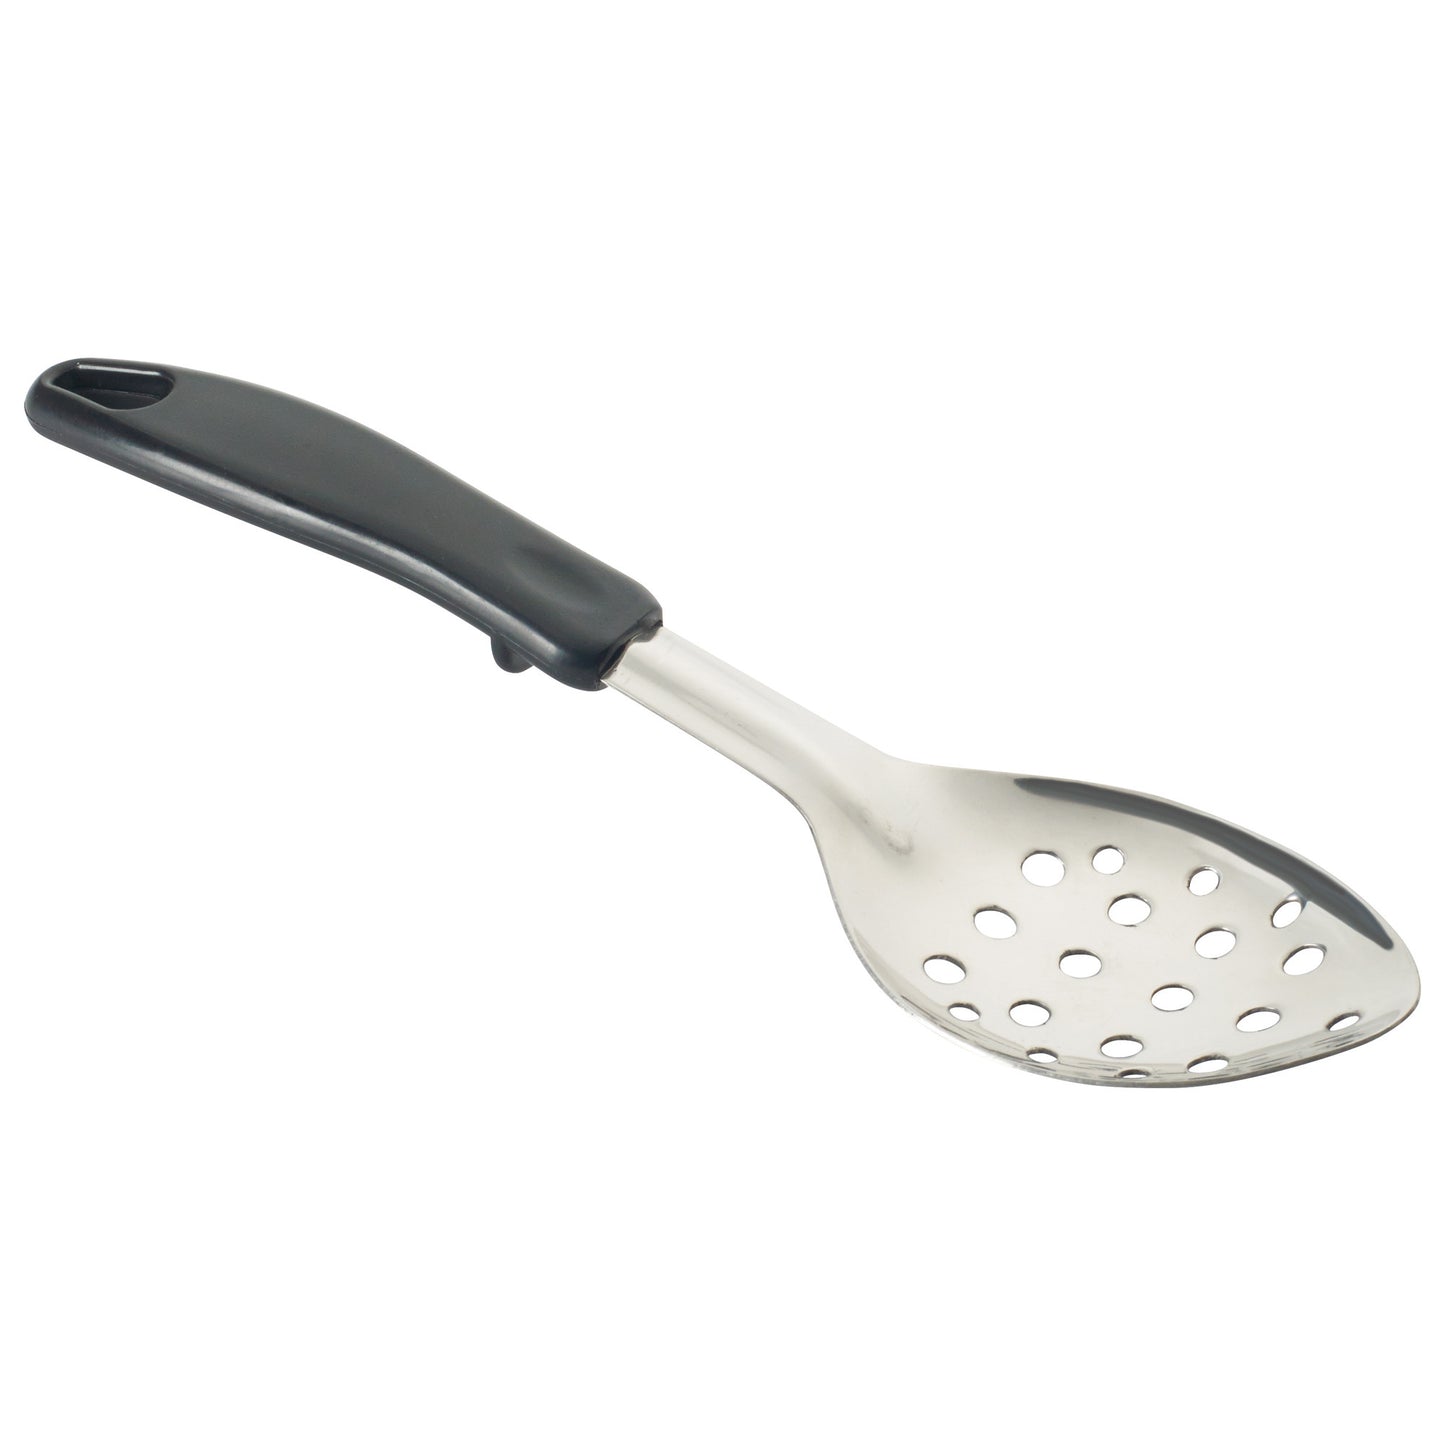 BHPP-11 - Basting Spoon with Stop-Hook Polypropylene Handle - Perforated, 11"